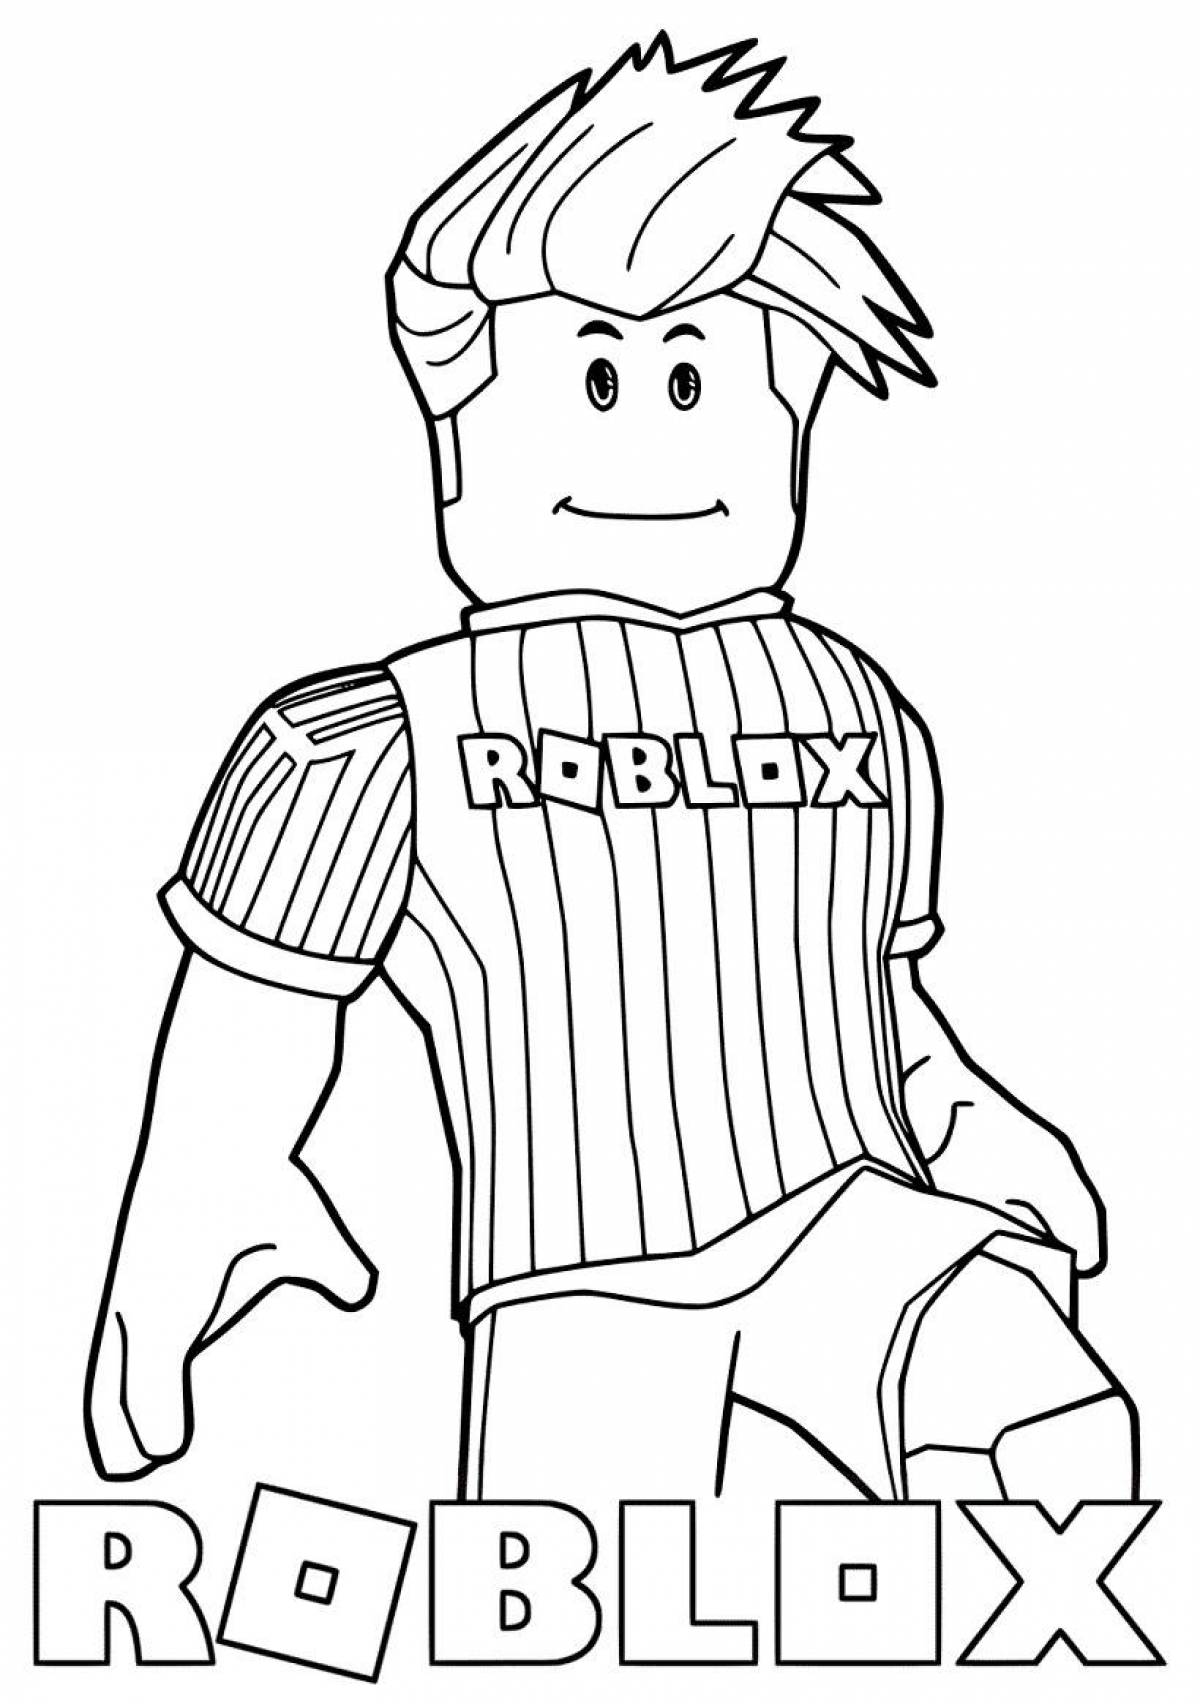 Outstanding roblox coloring book for boys